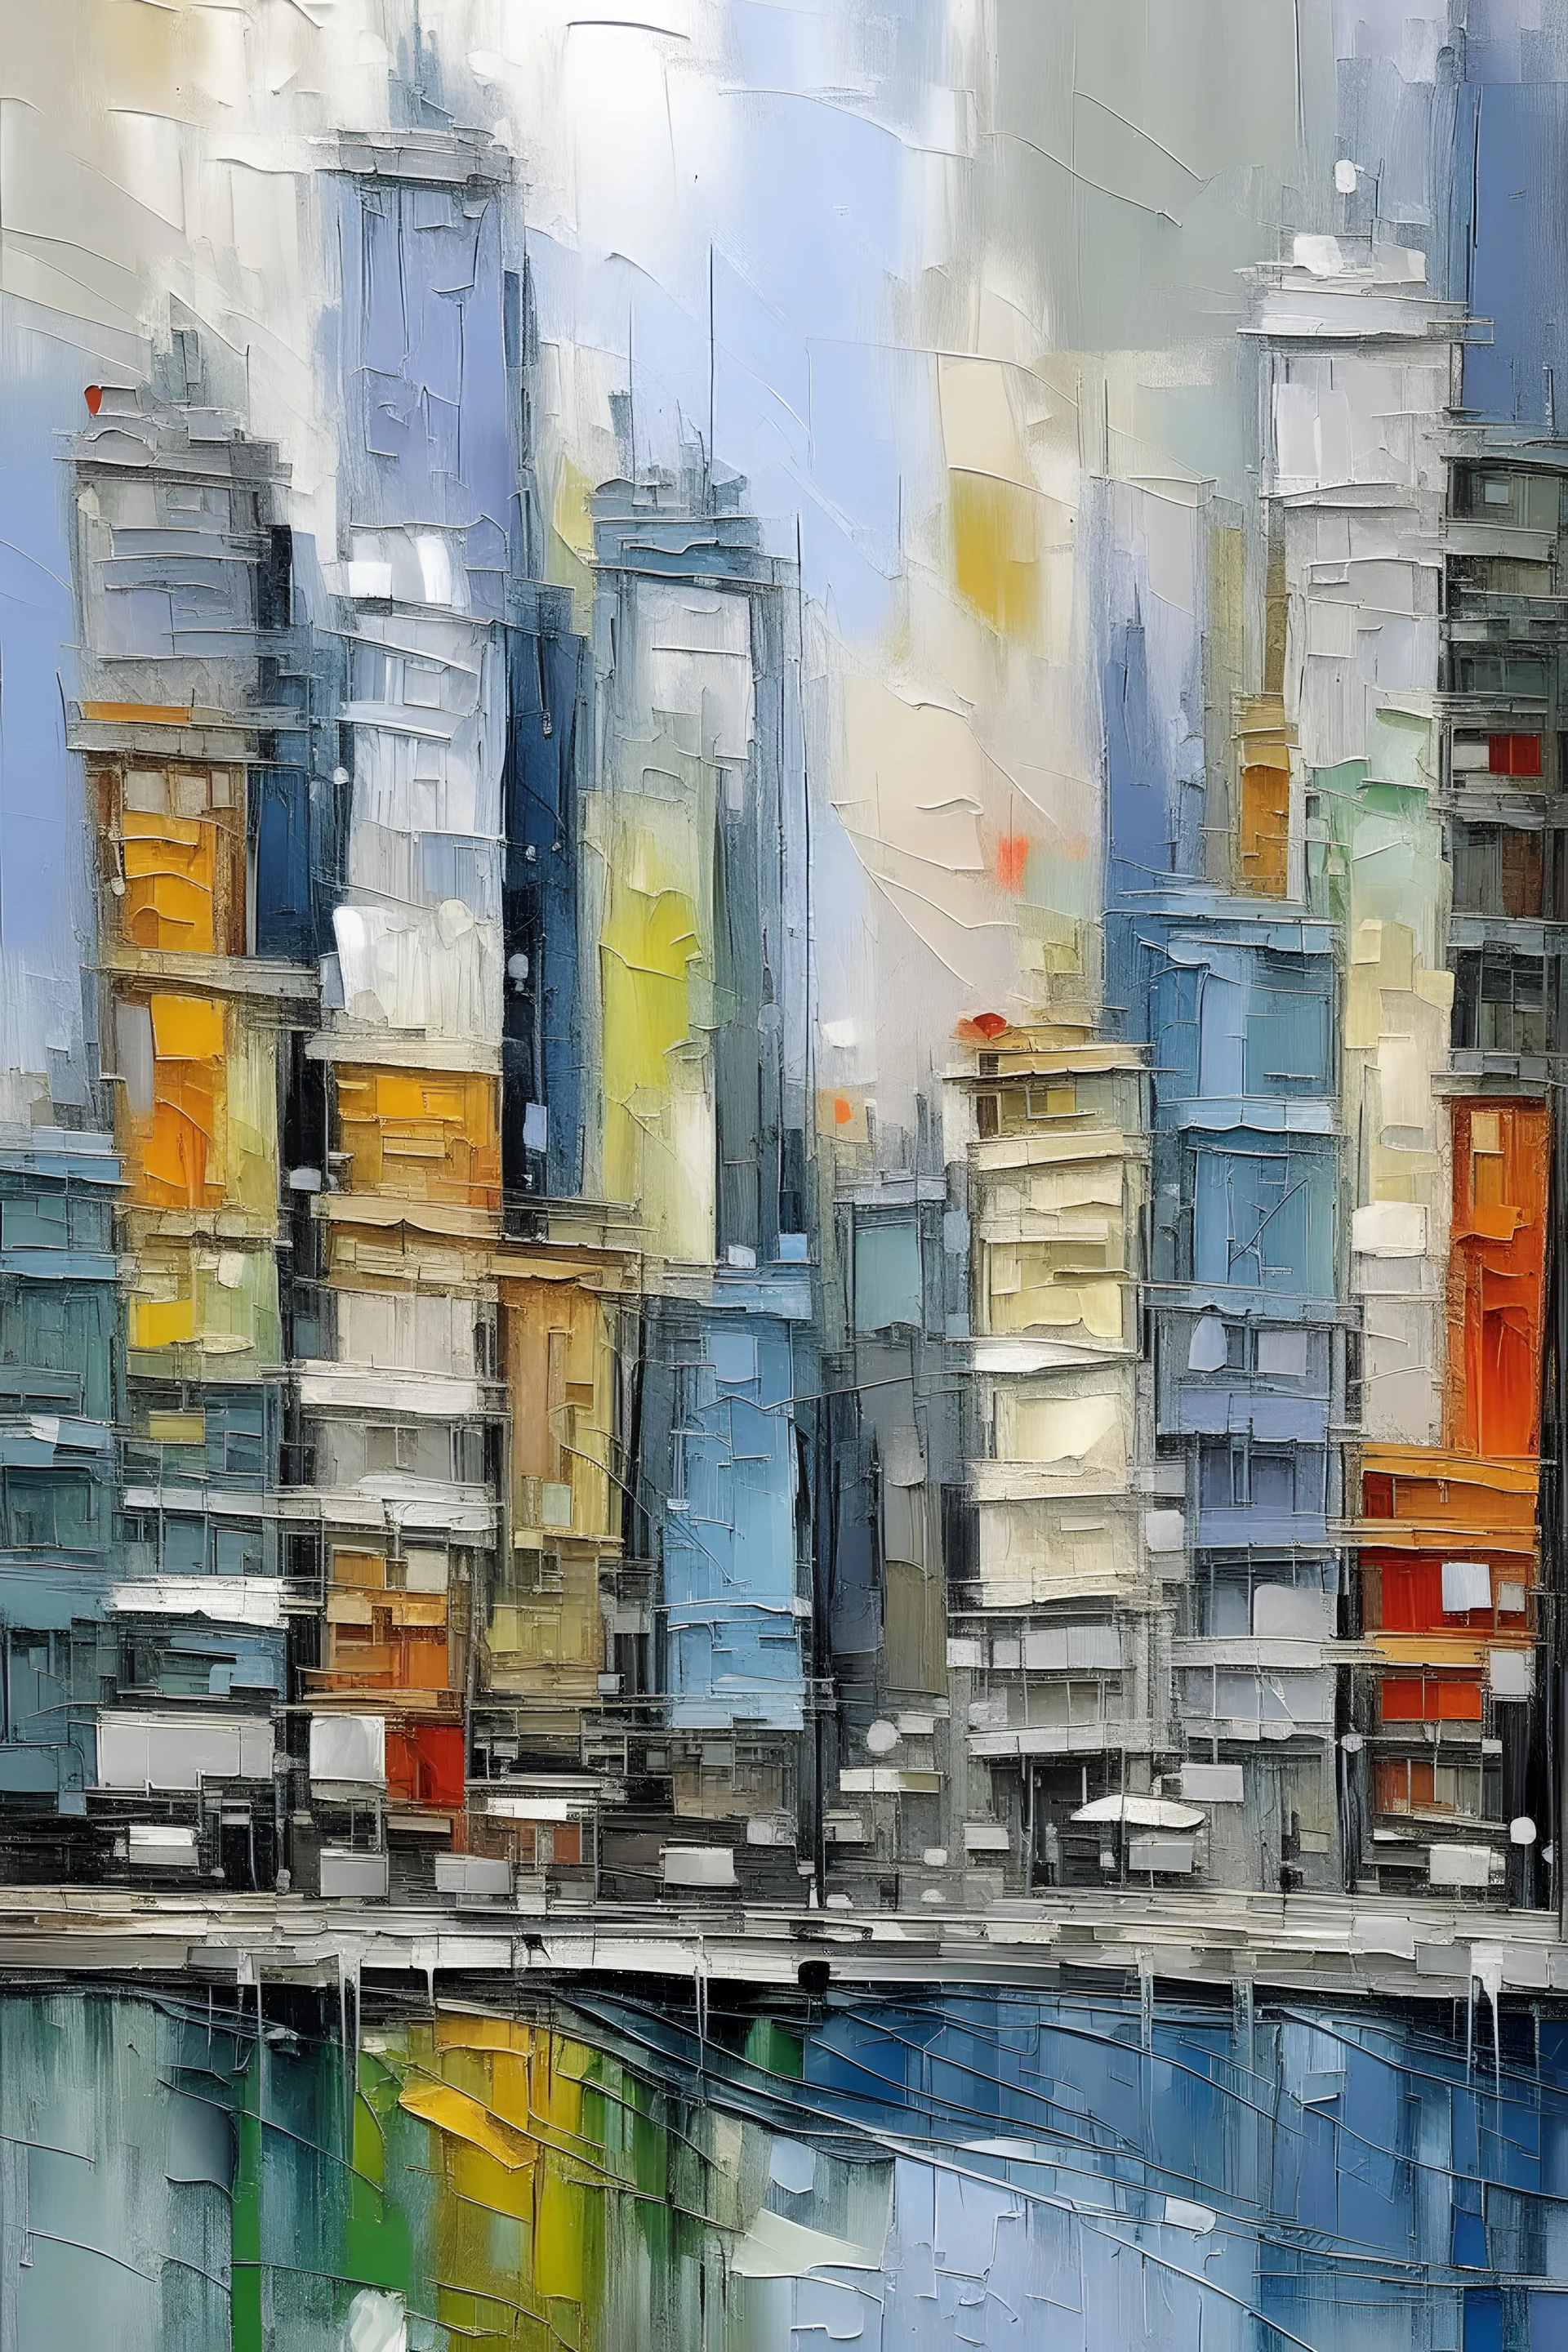 City. Painting with a palette knife, deep, rich colors, as well as complex, expressive textures. Write expressively, model large bright shapes, create voluminous dynamic strokes.